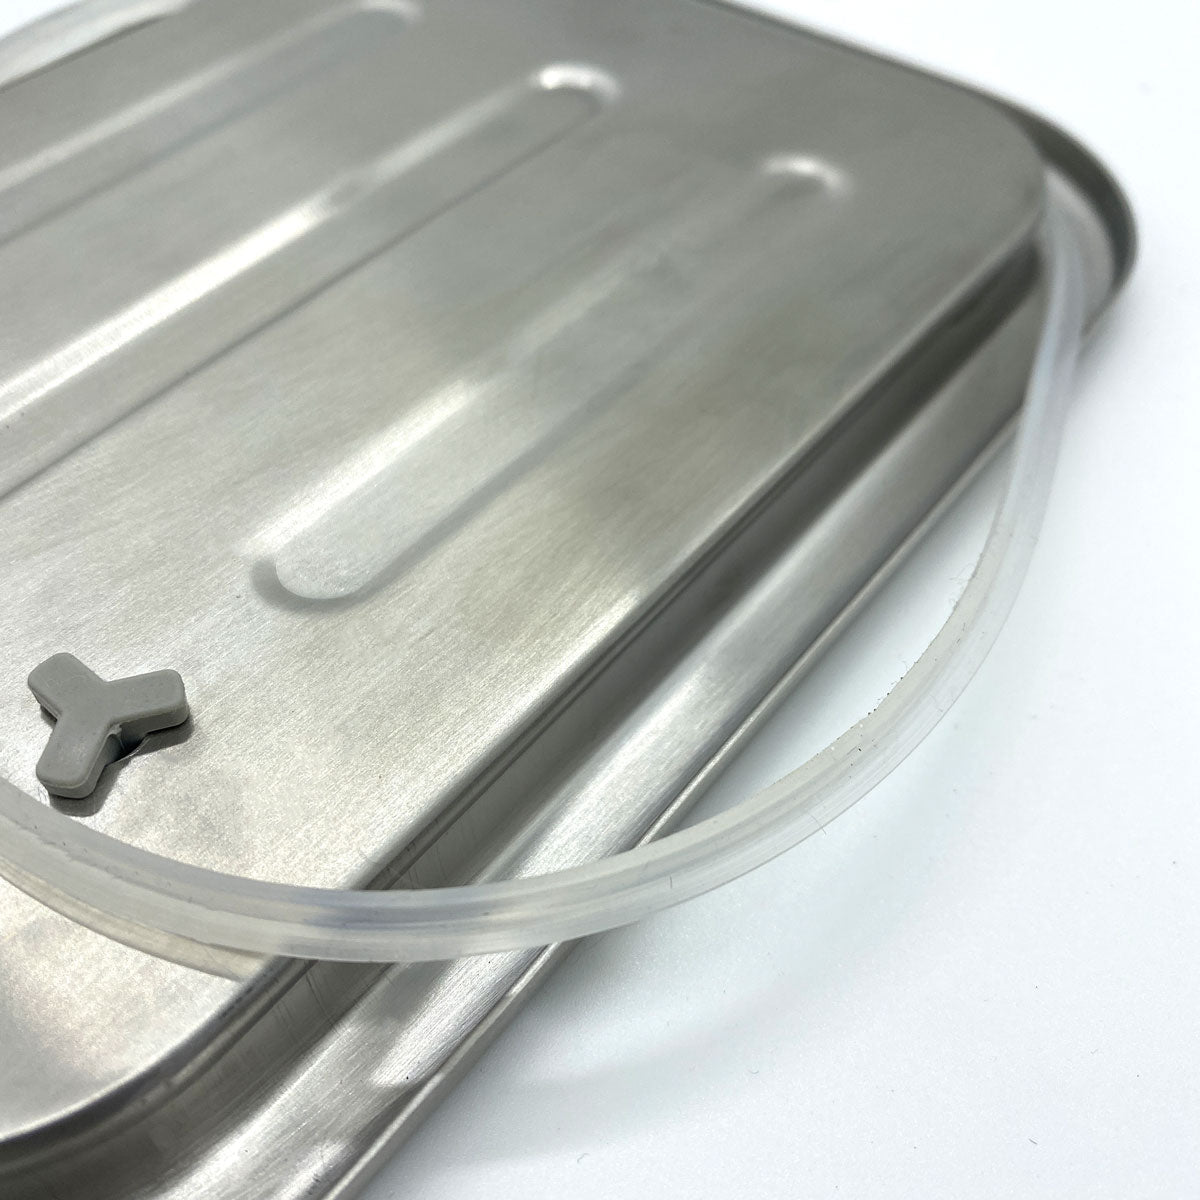 bottom side and sealing ring of the cover of the stainless steel snack box